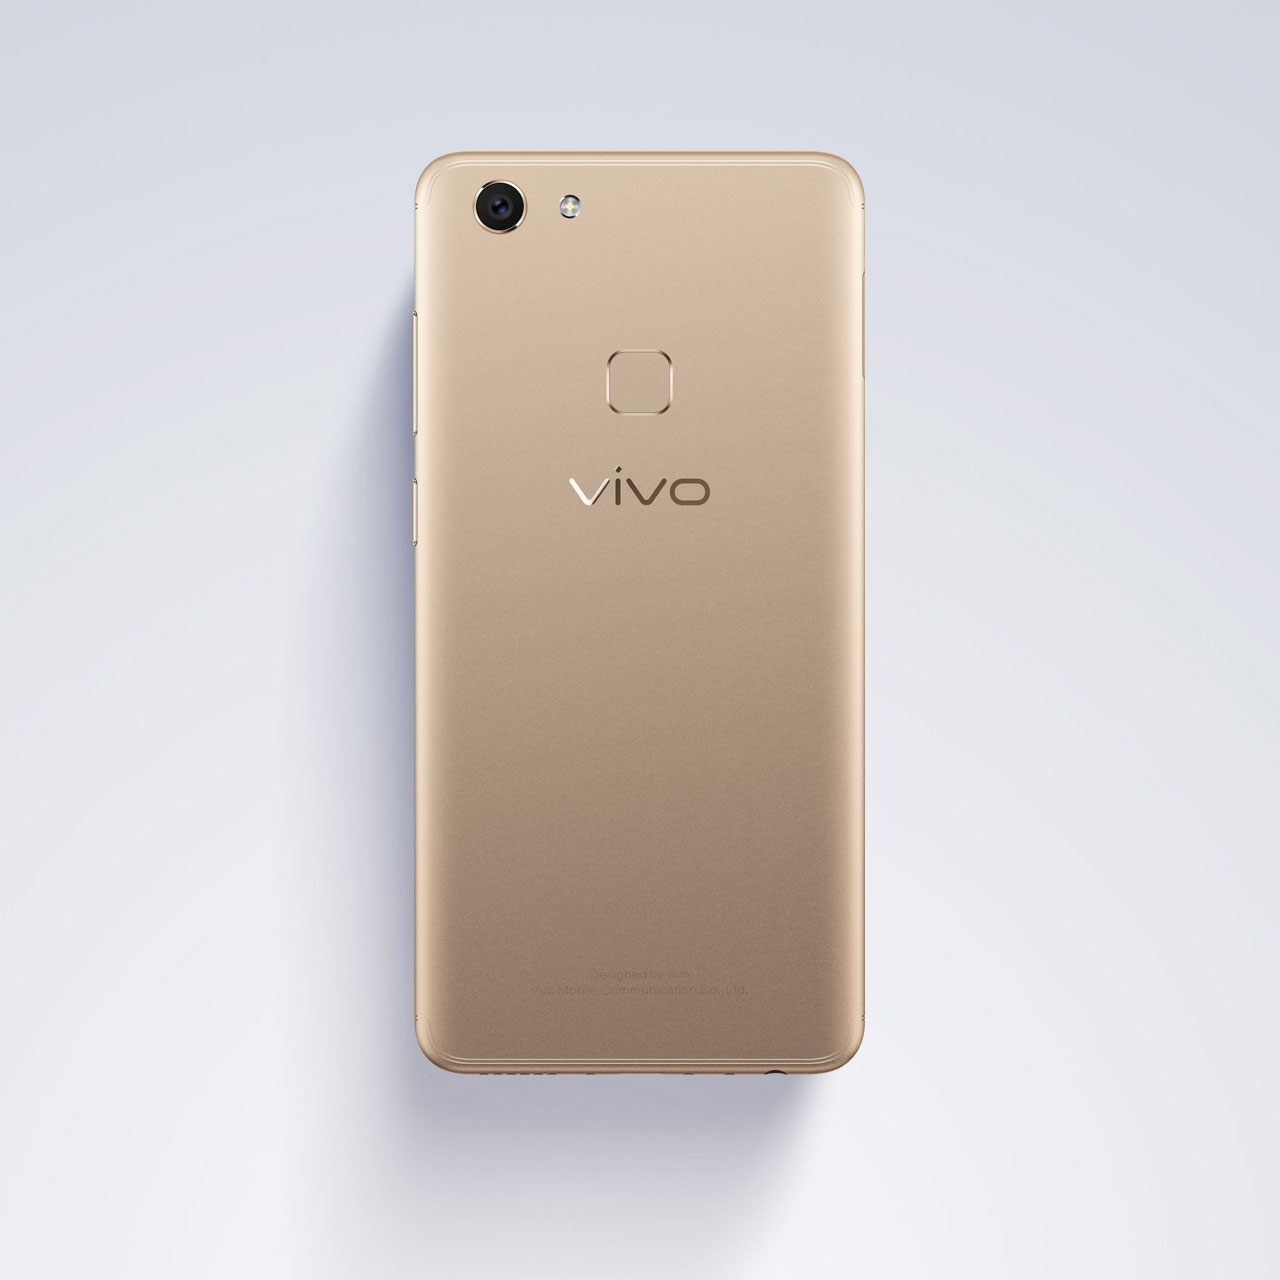 Up for the Vivo Selfie Challenge?! and Win a Vivo Smartphone